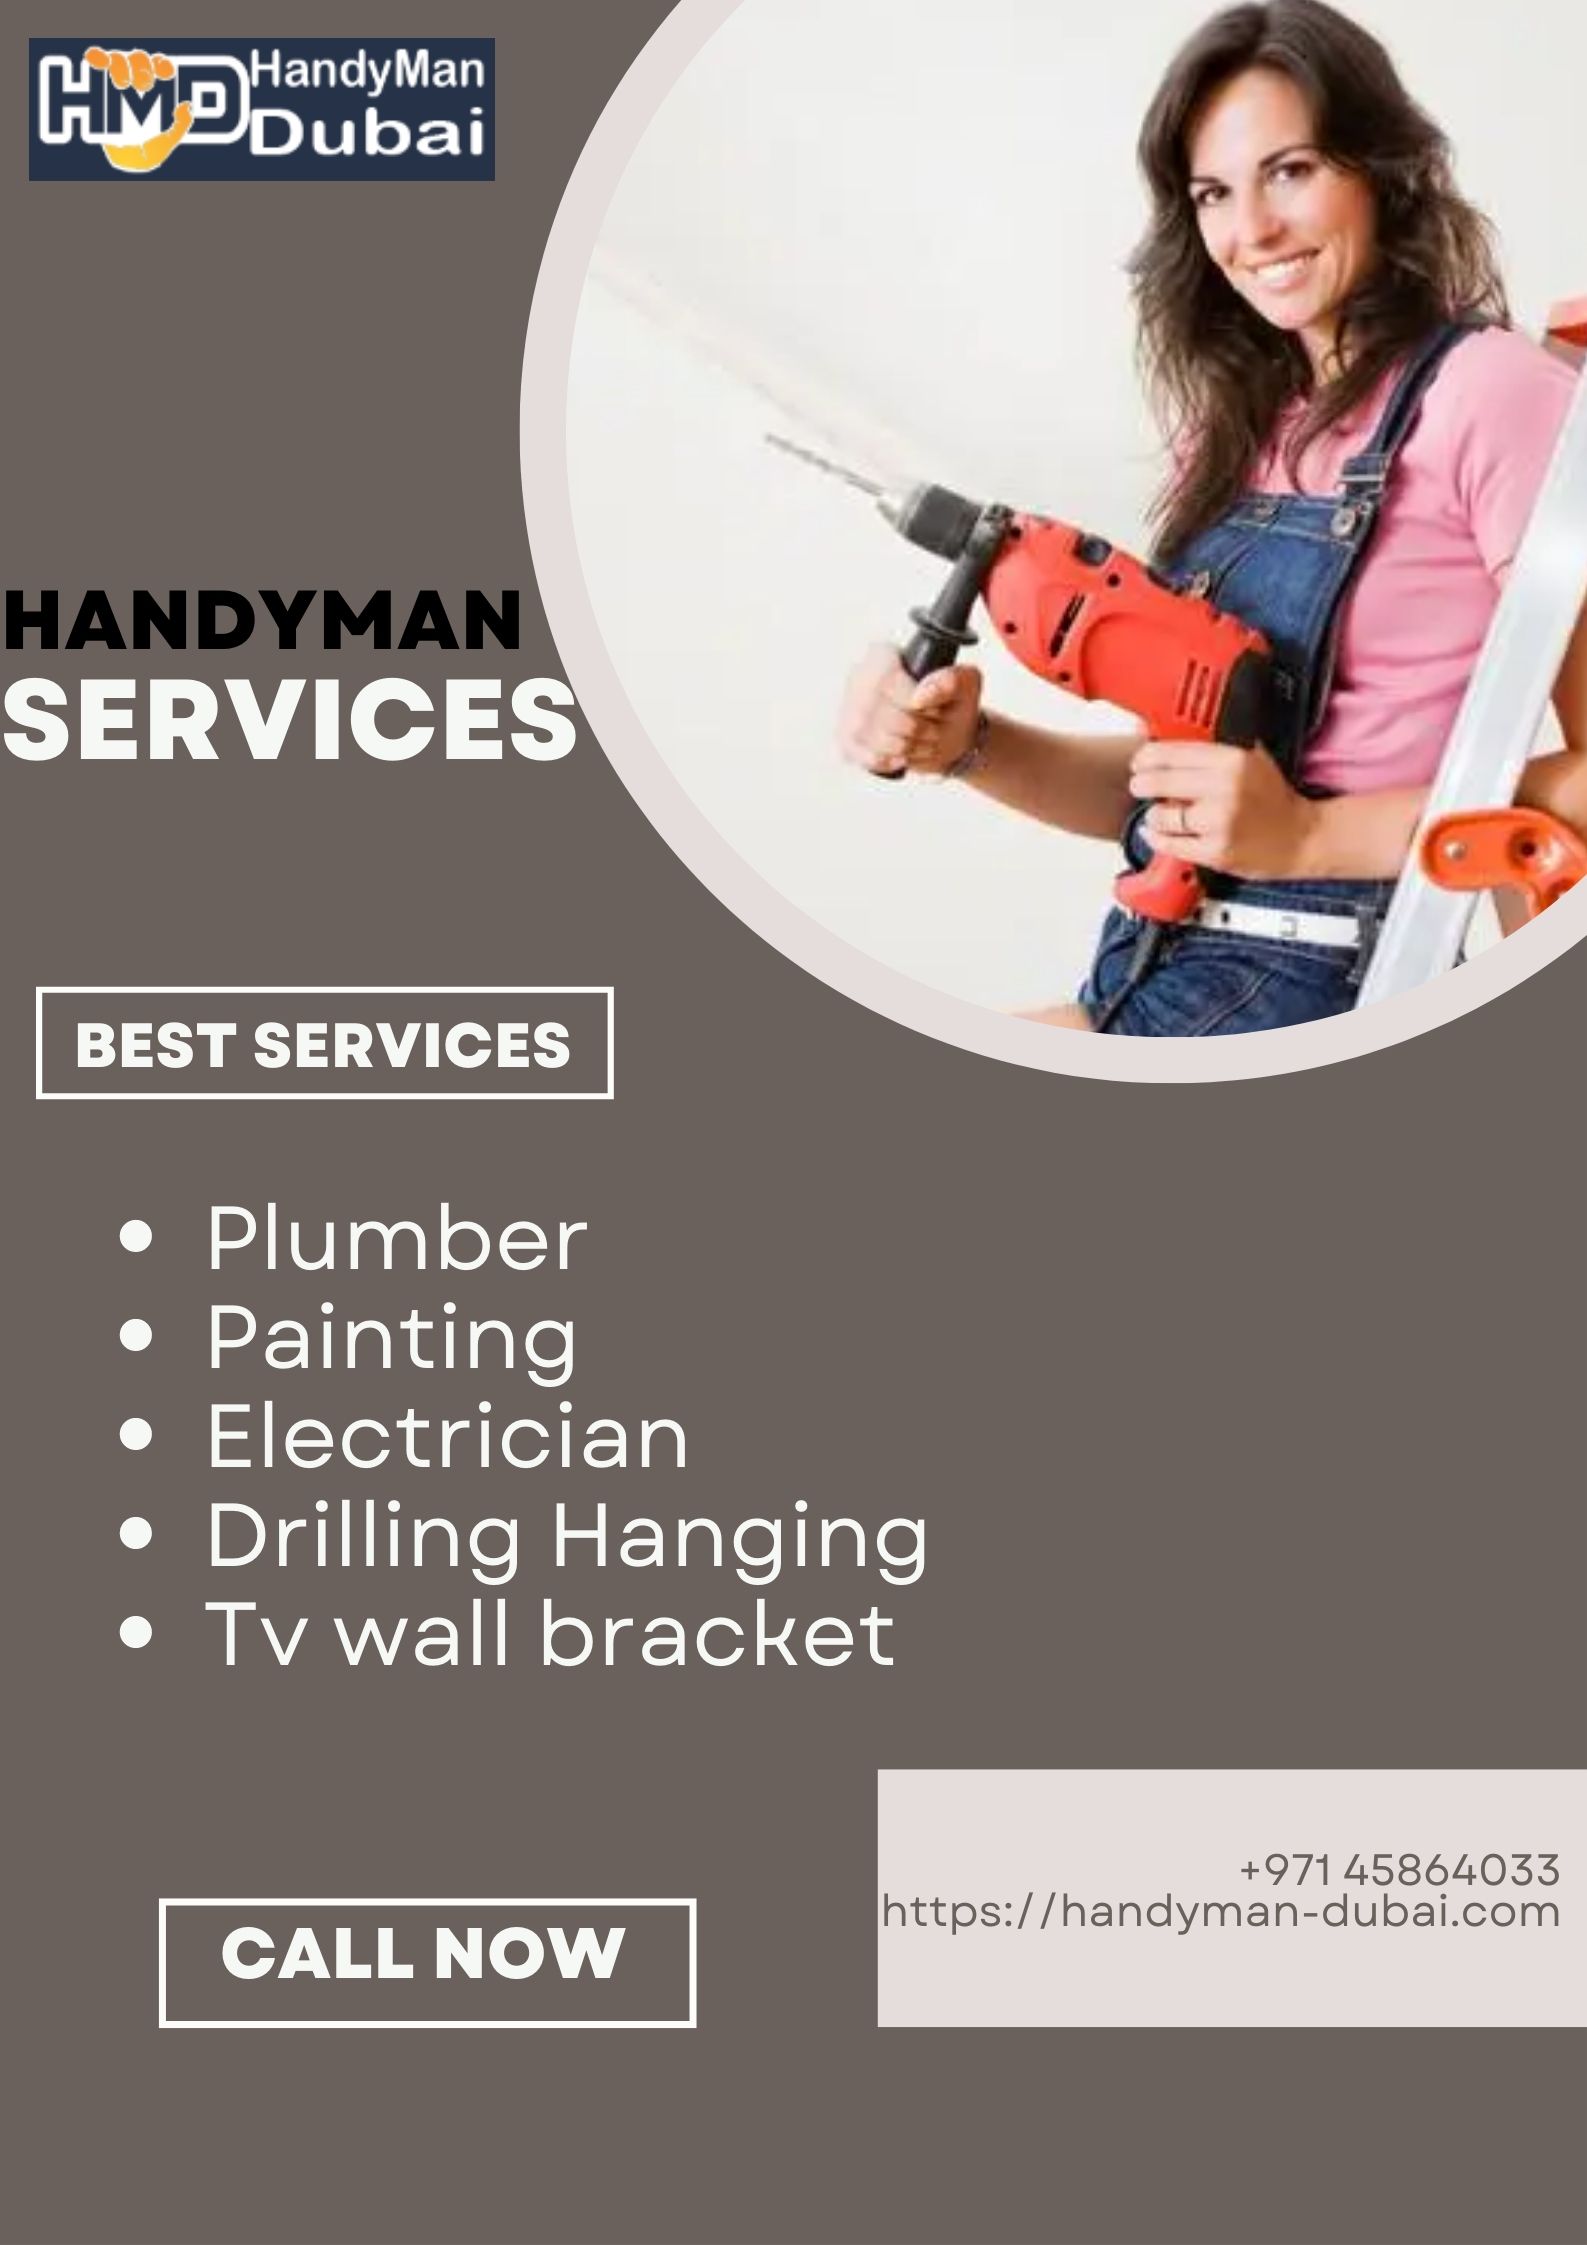 Handyman Dubai has the solution to all your questions